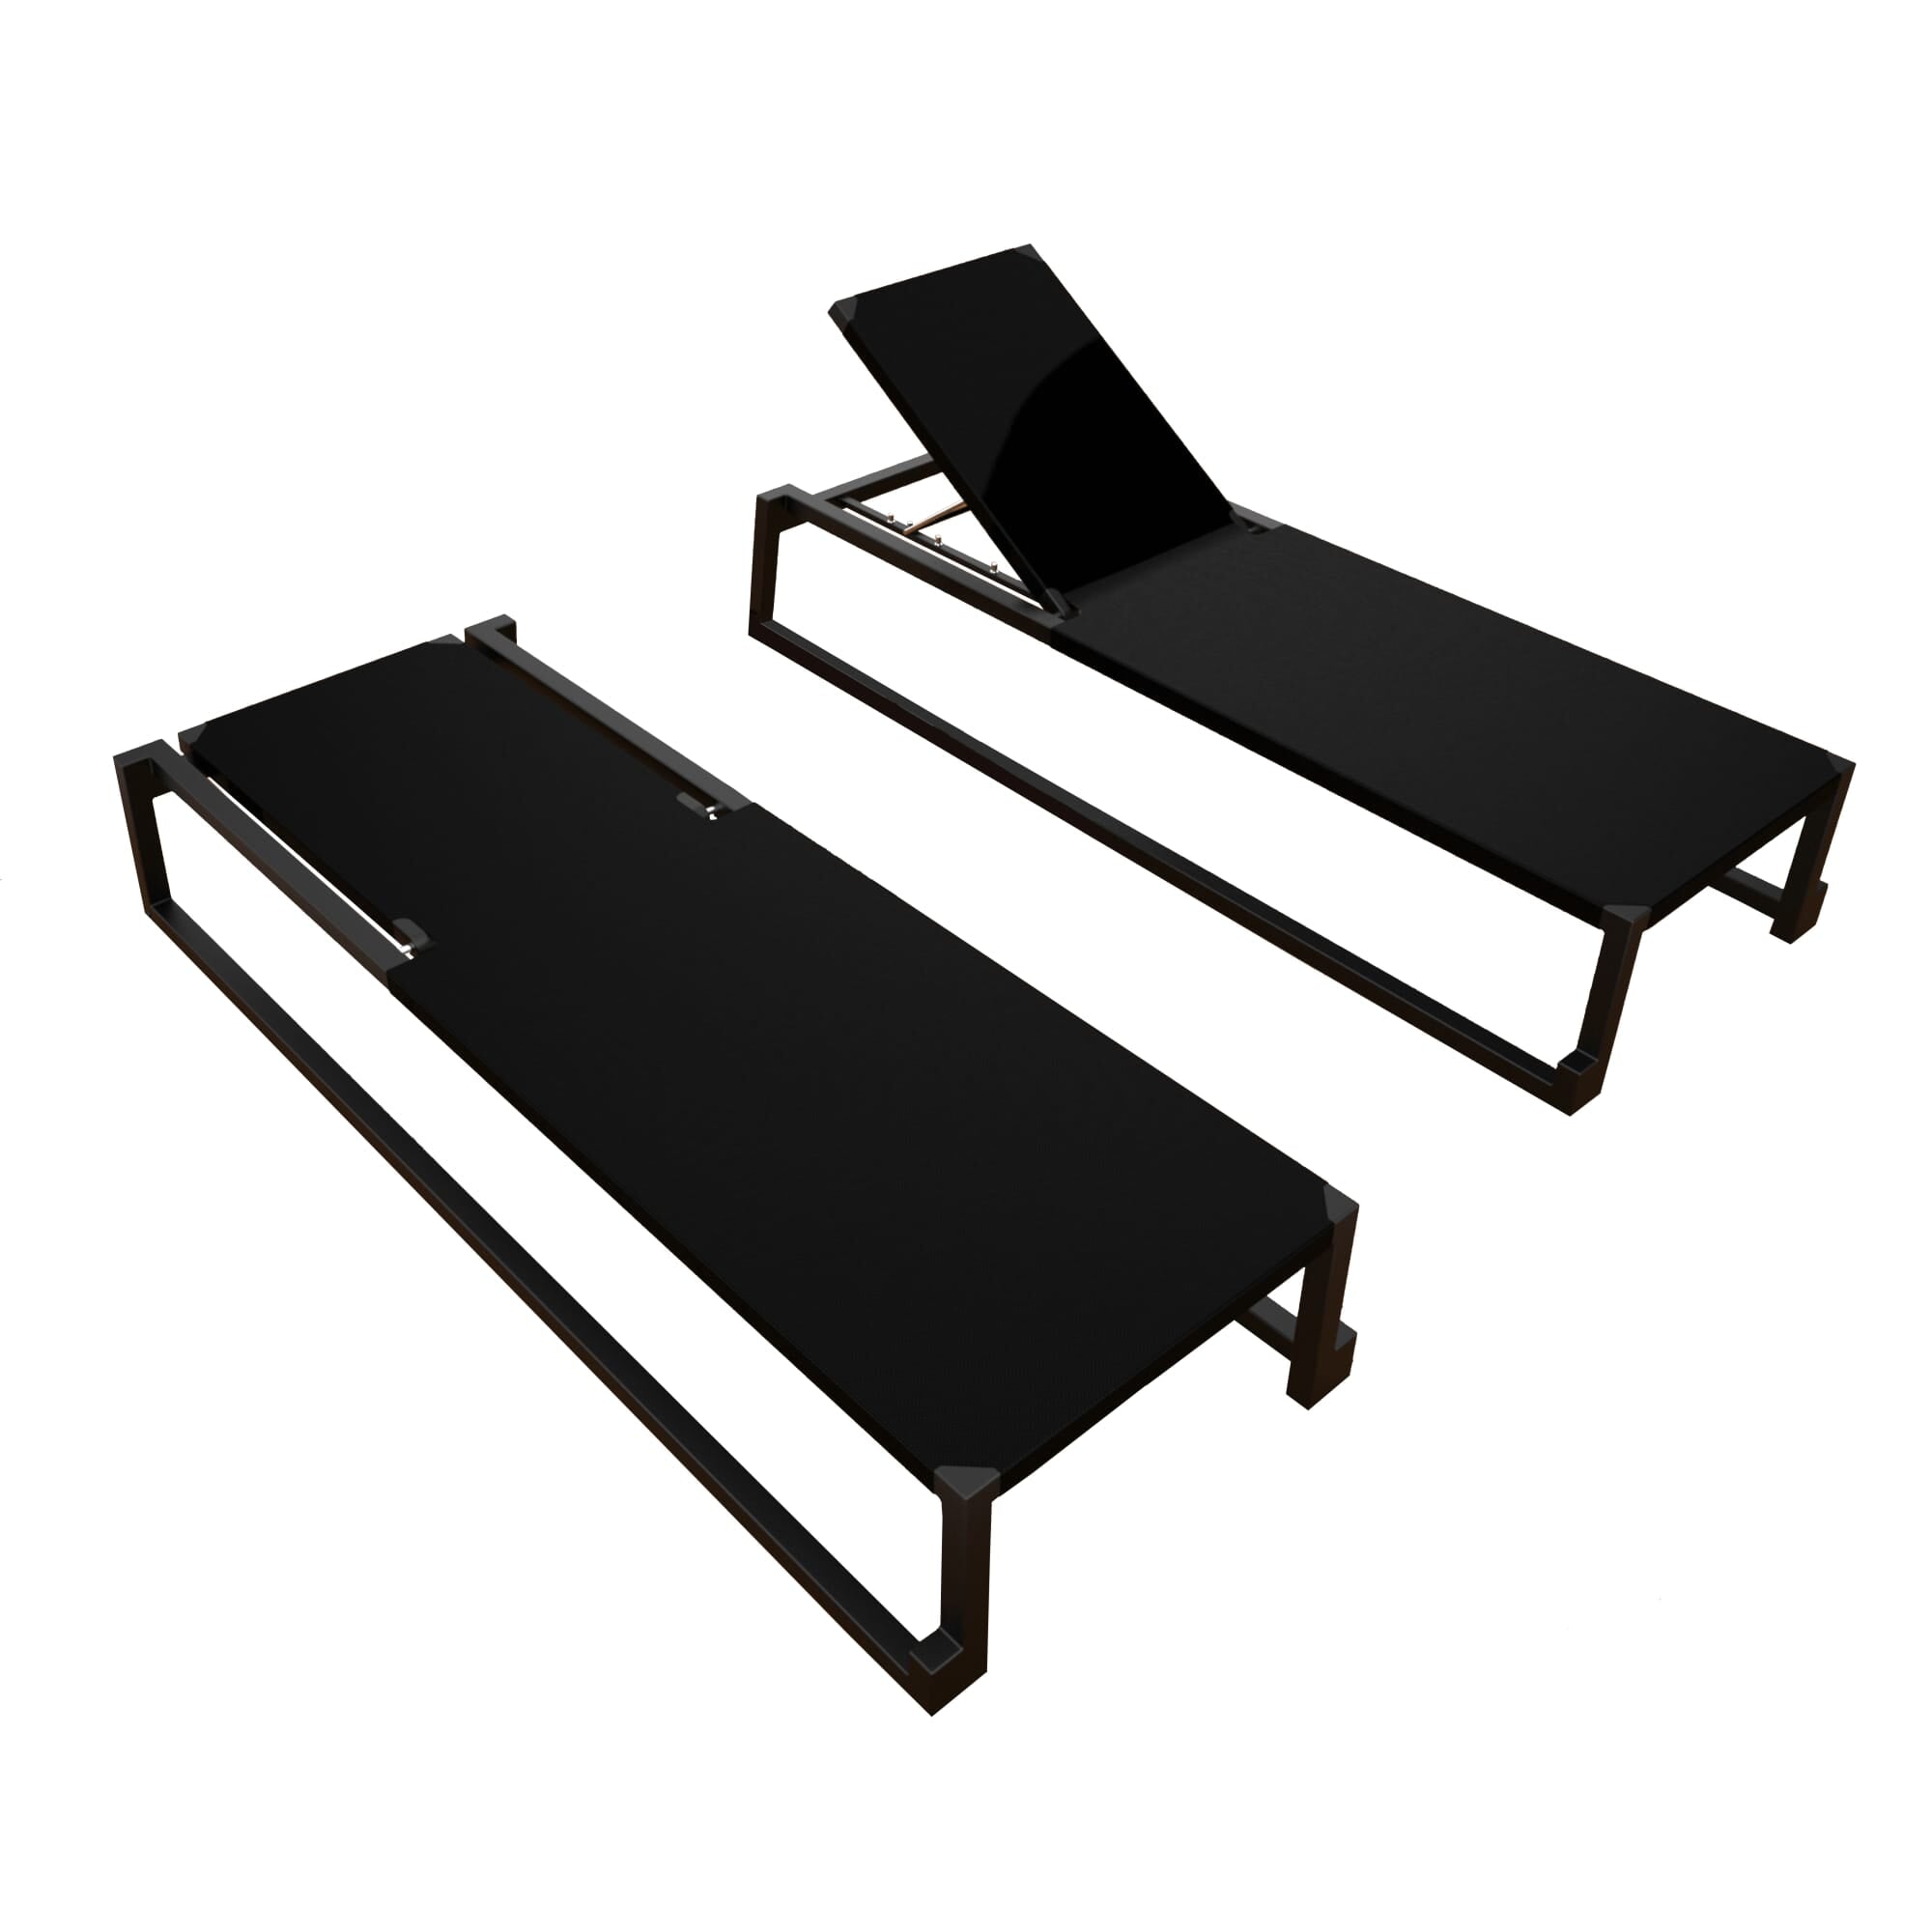 Resol Milano Sunlounger Outdoor White structure - Black